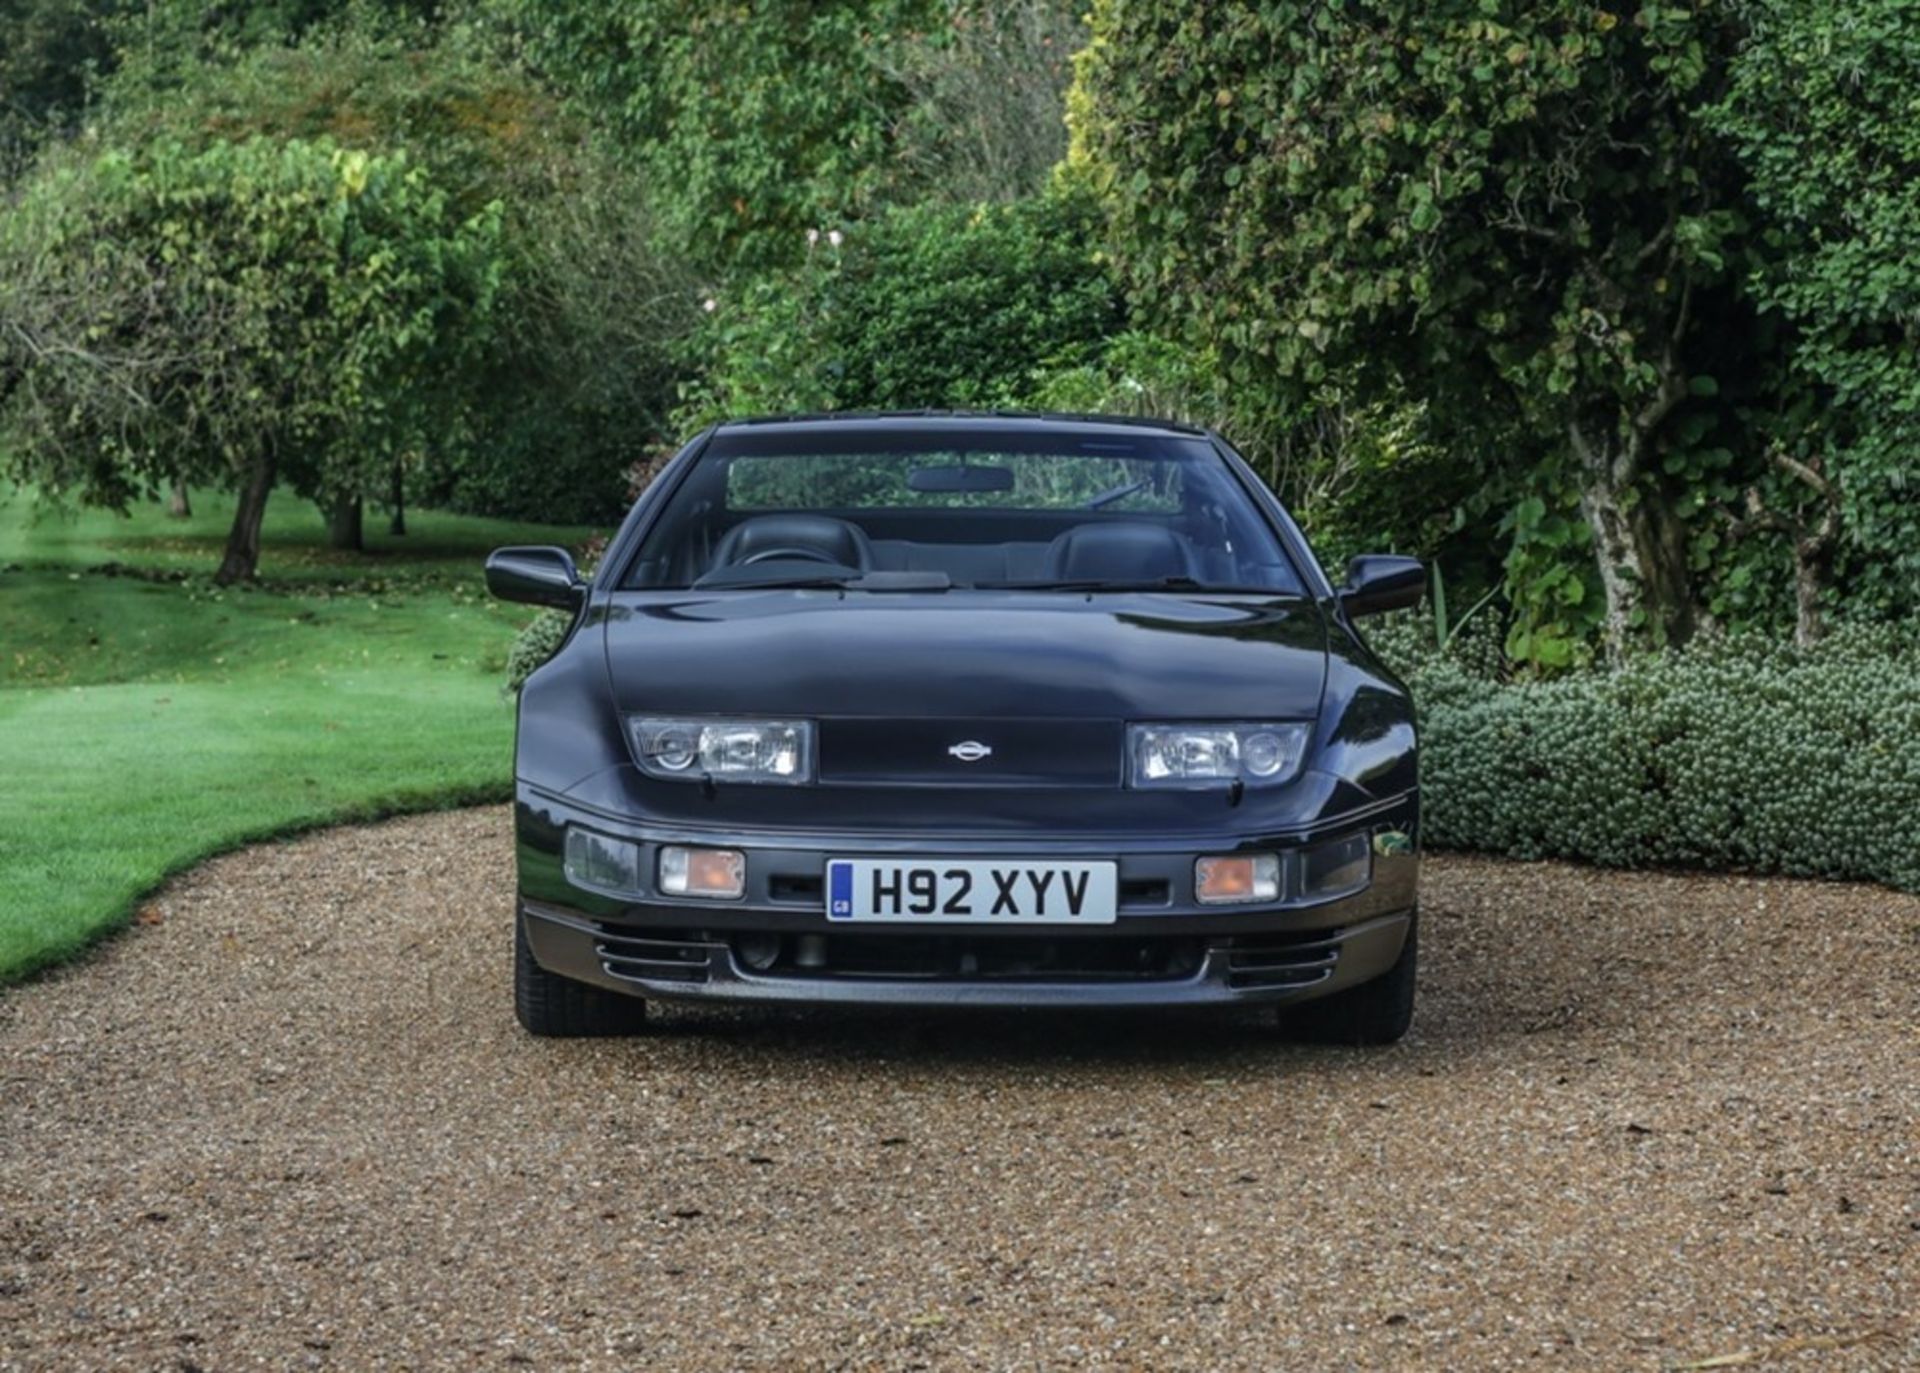 1990 Nissan 300ZX Twin Turbo - Image 5 of 9